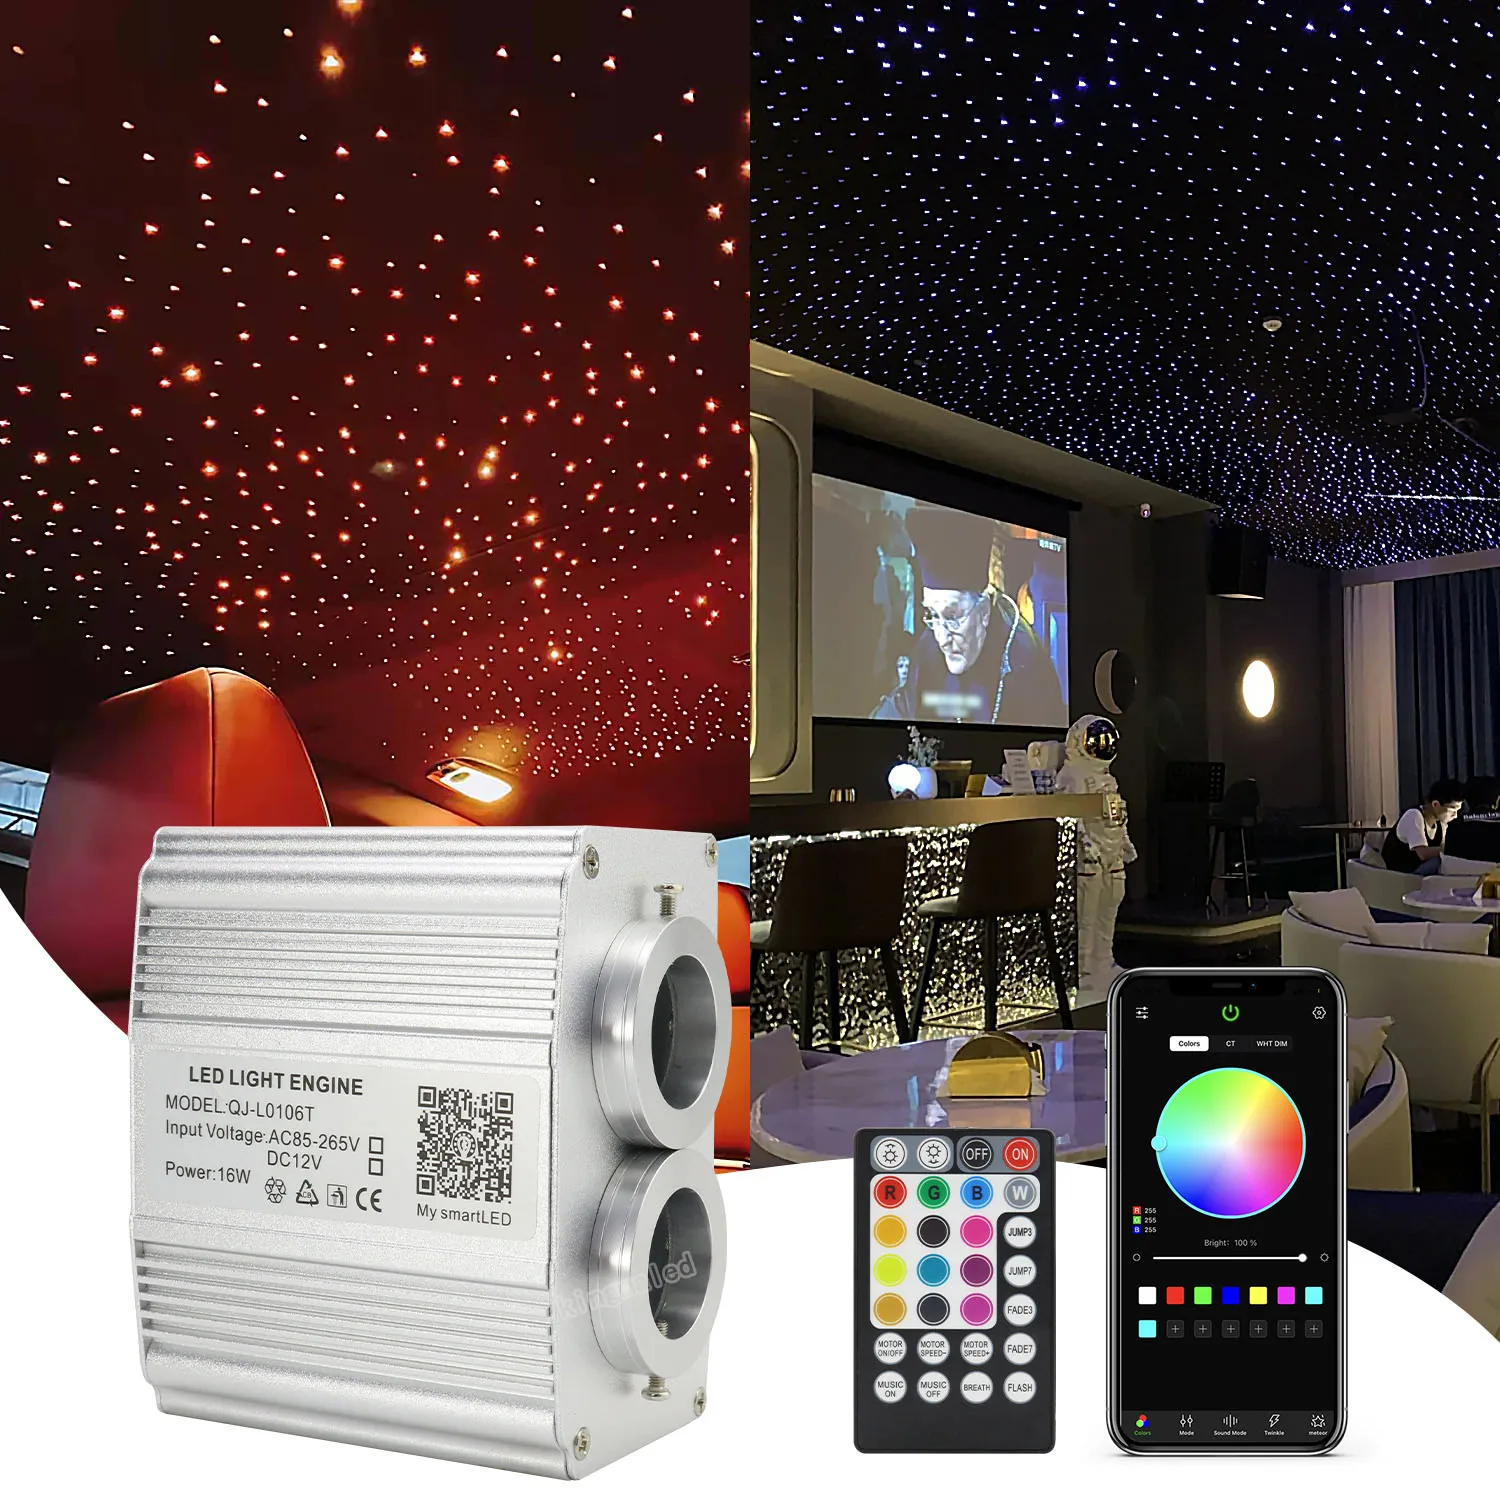 CREE Chip 16W RGBW Twinkle Double head LED Fiber Optic Engine Driver with 28key RF& app Controller for Fiber Optic Star Ceiling